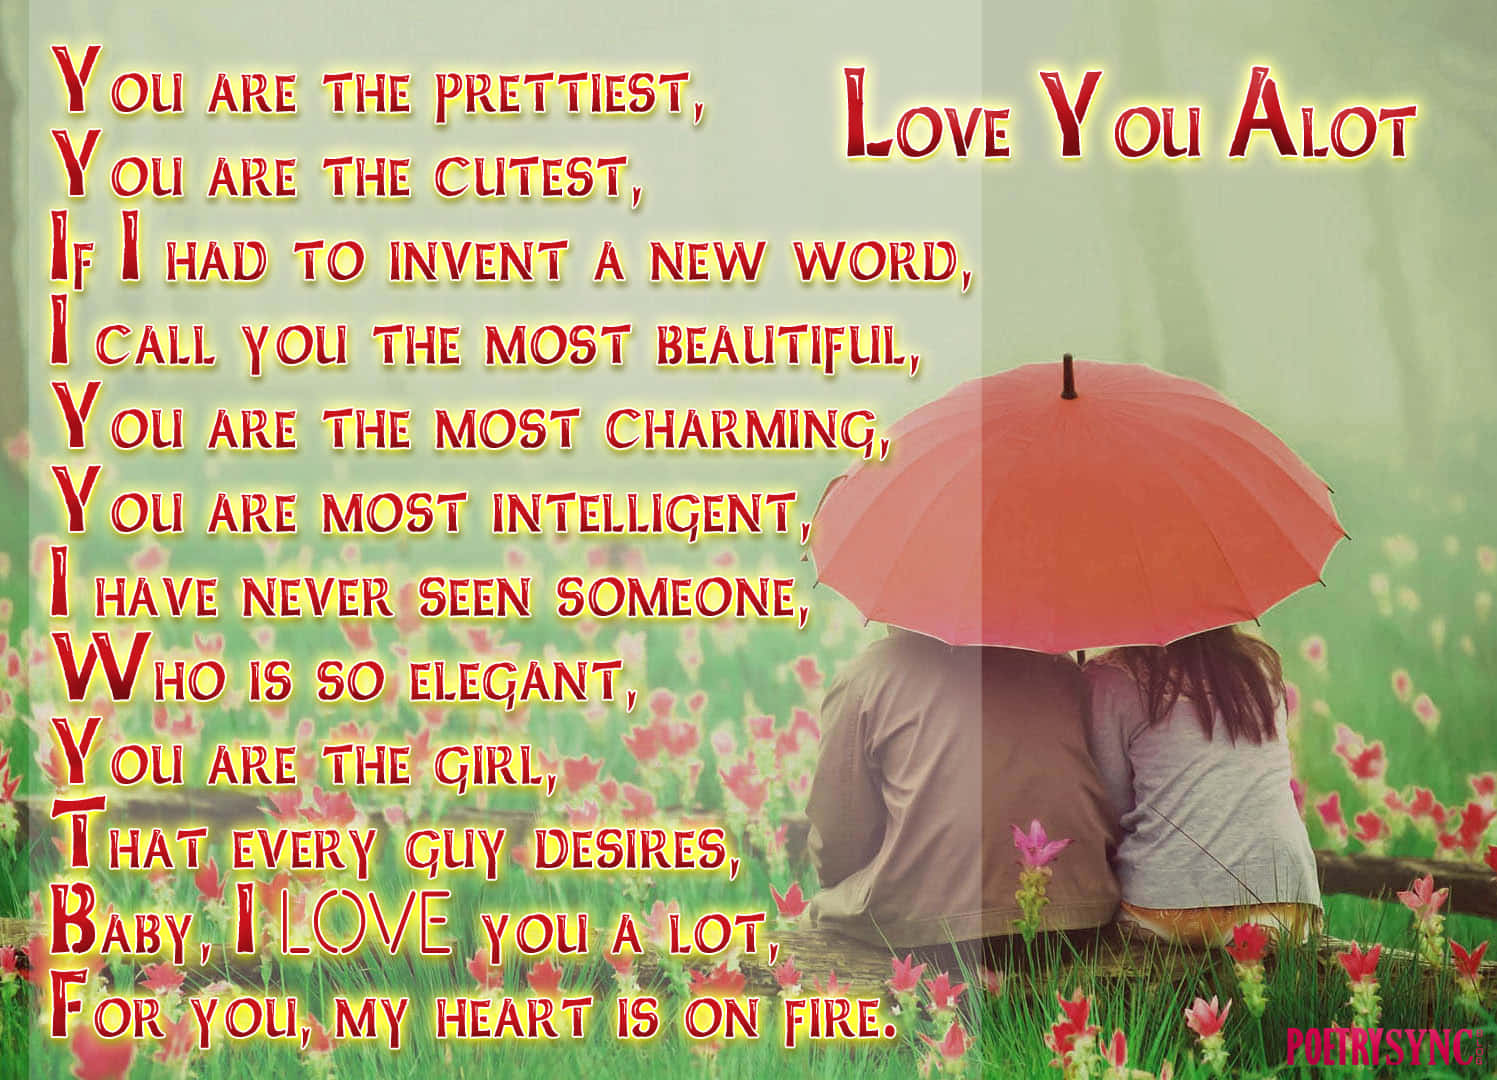 Love You Alot Quotes